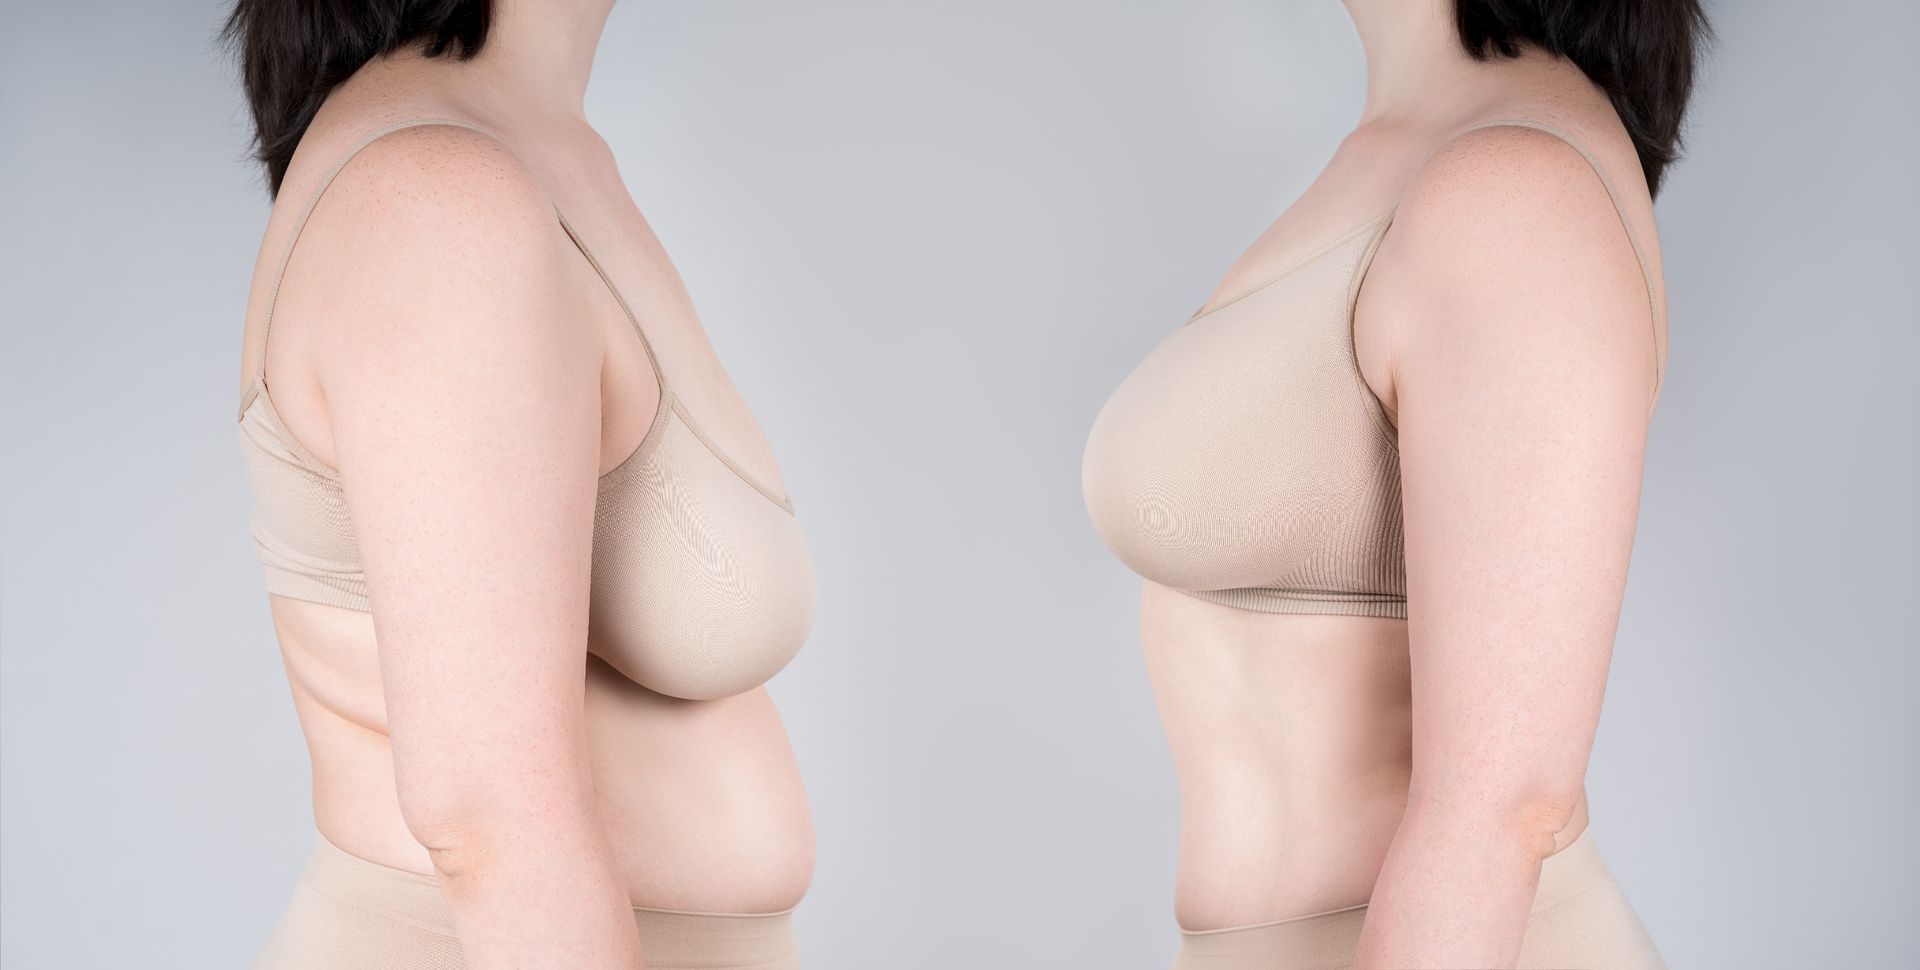 Breast Augmentation and Breast Lift combination benefits